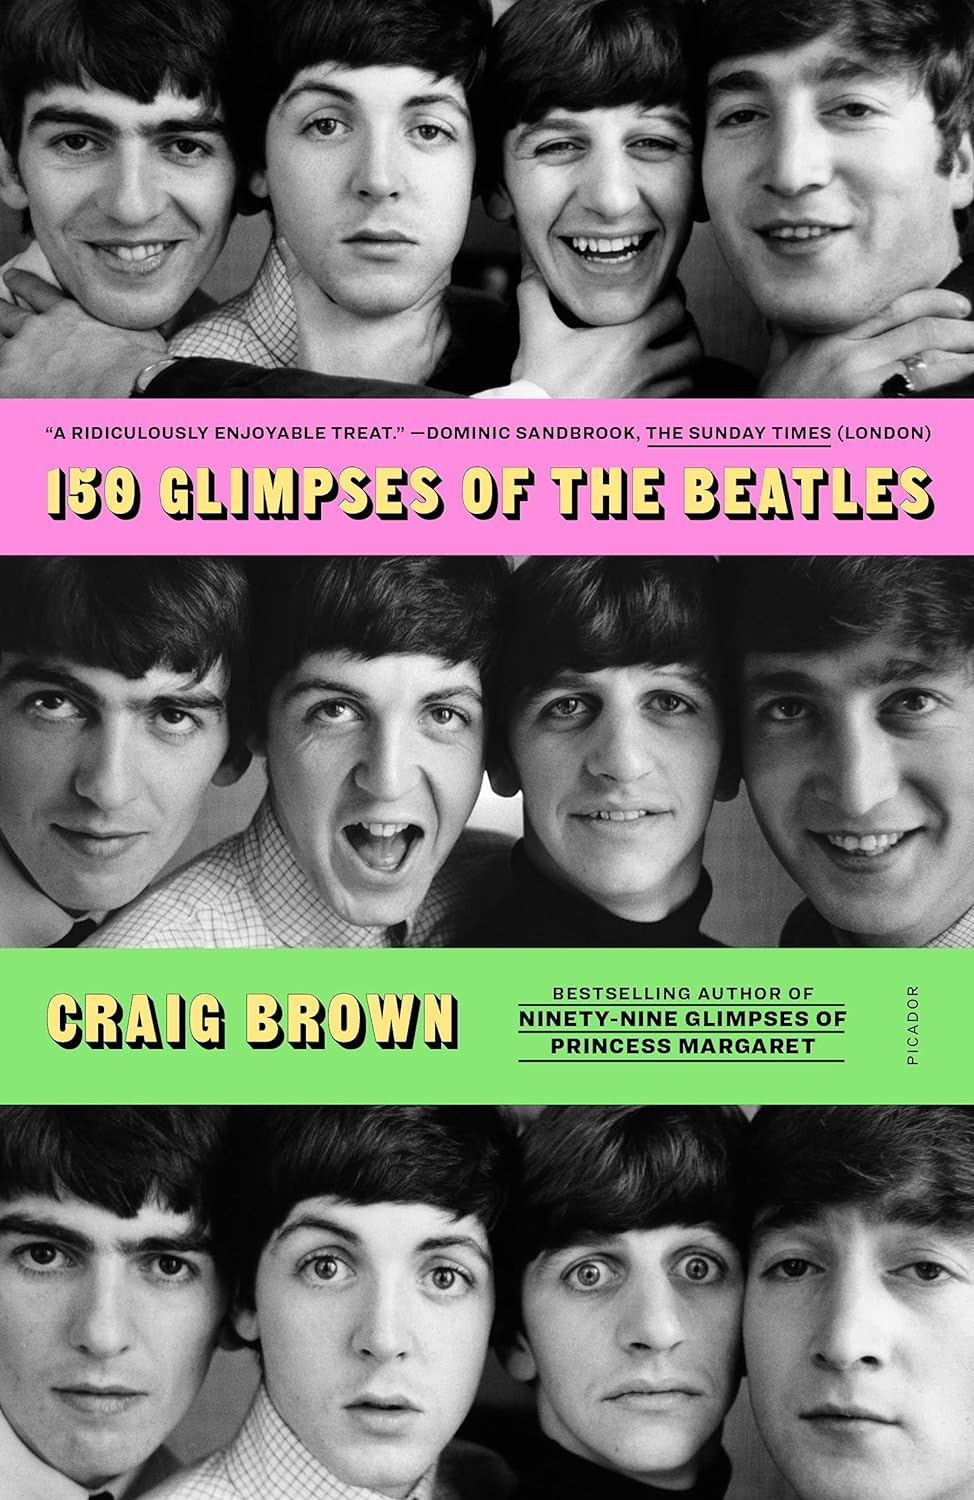 Beatles - 150 Glimpses Of The Beatles Paperback Book - [Books]